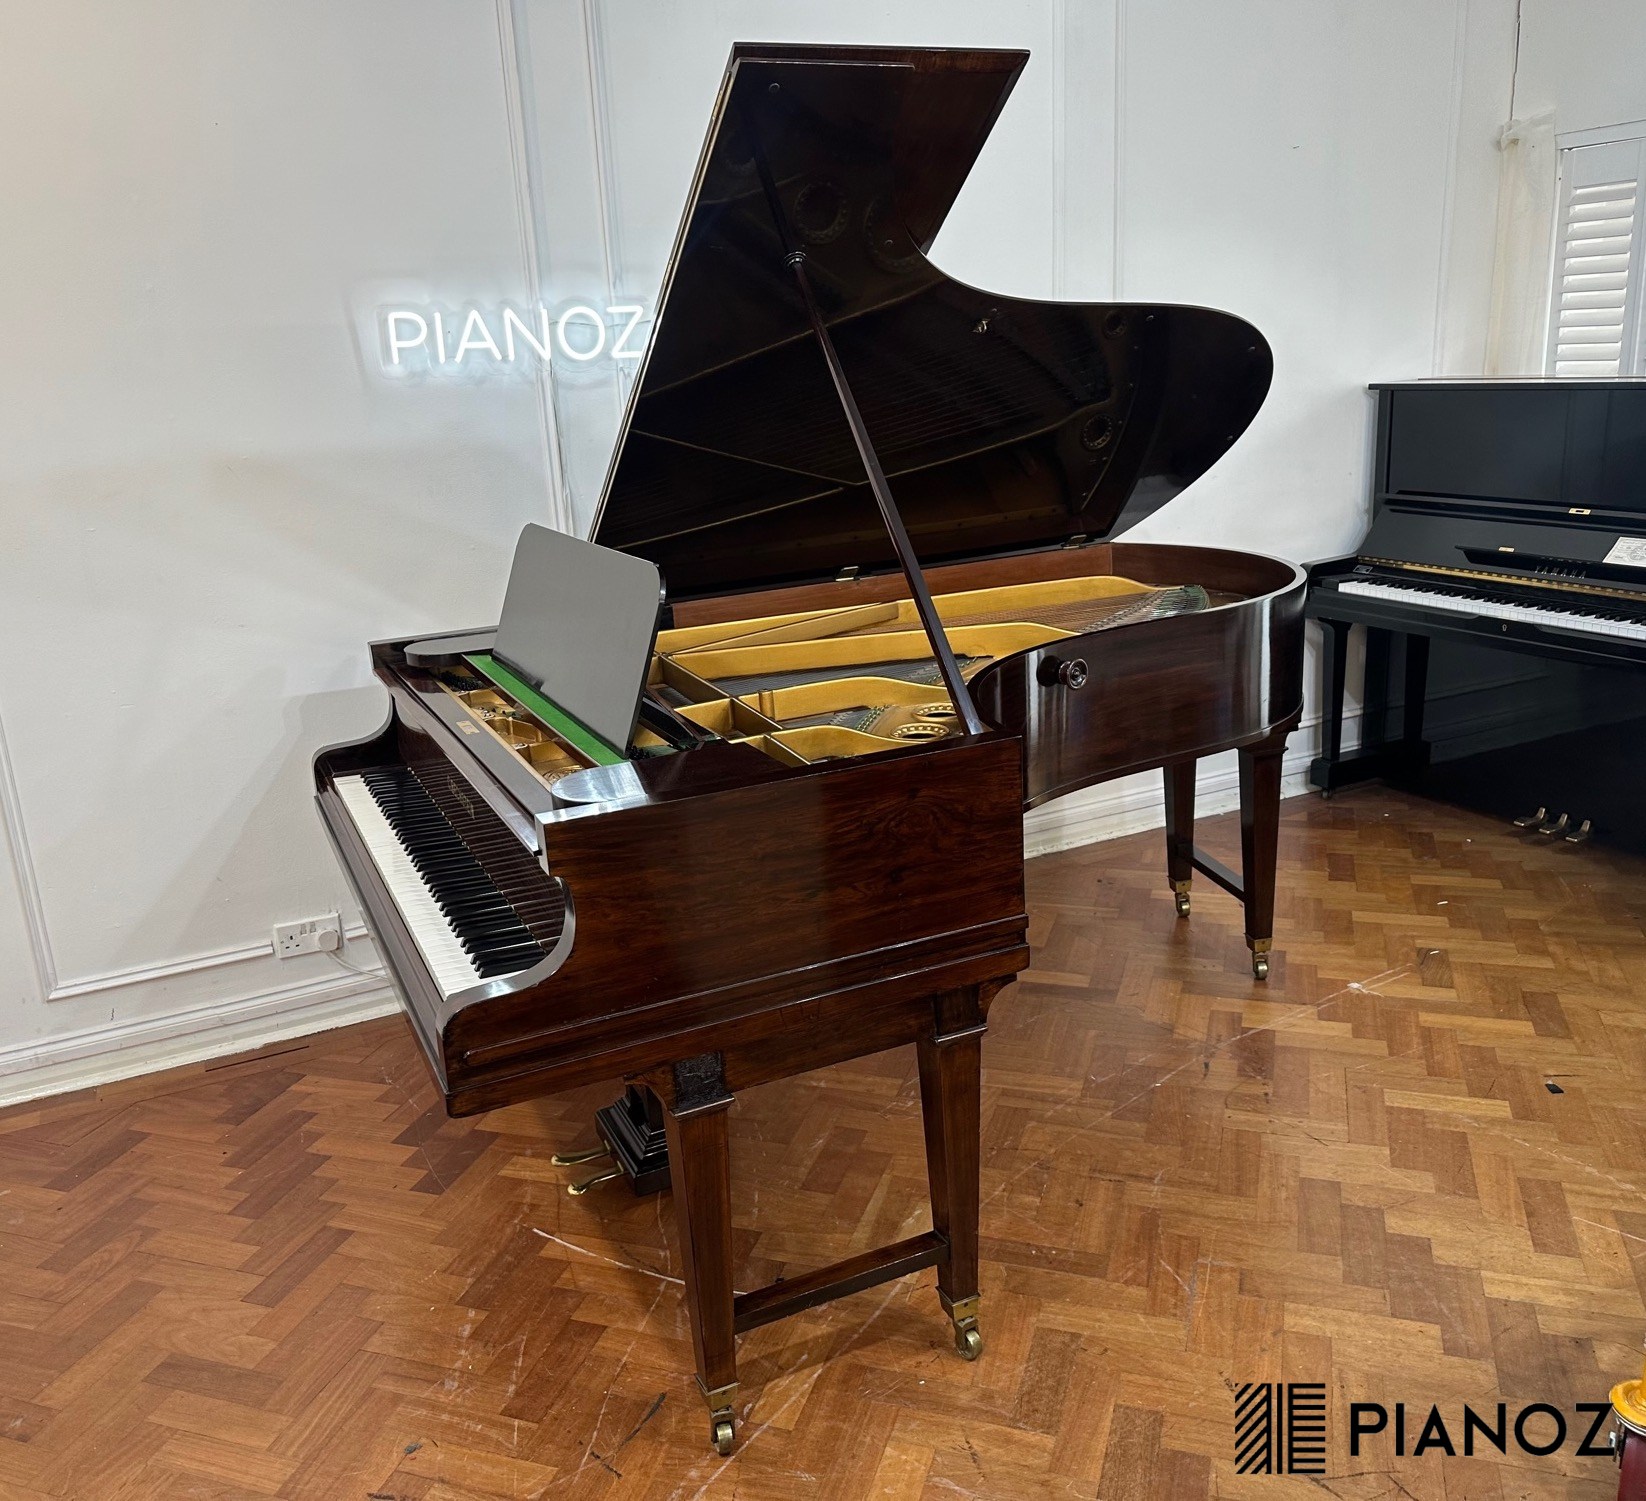 Bechstein Model C Grand Piano piano for sale in UK